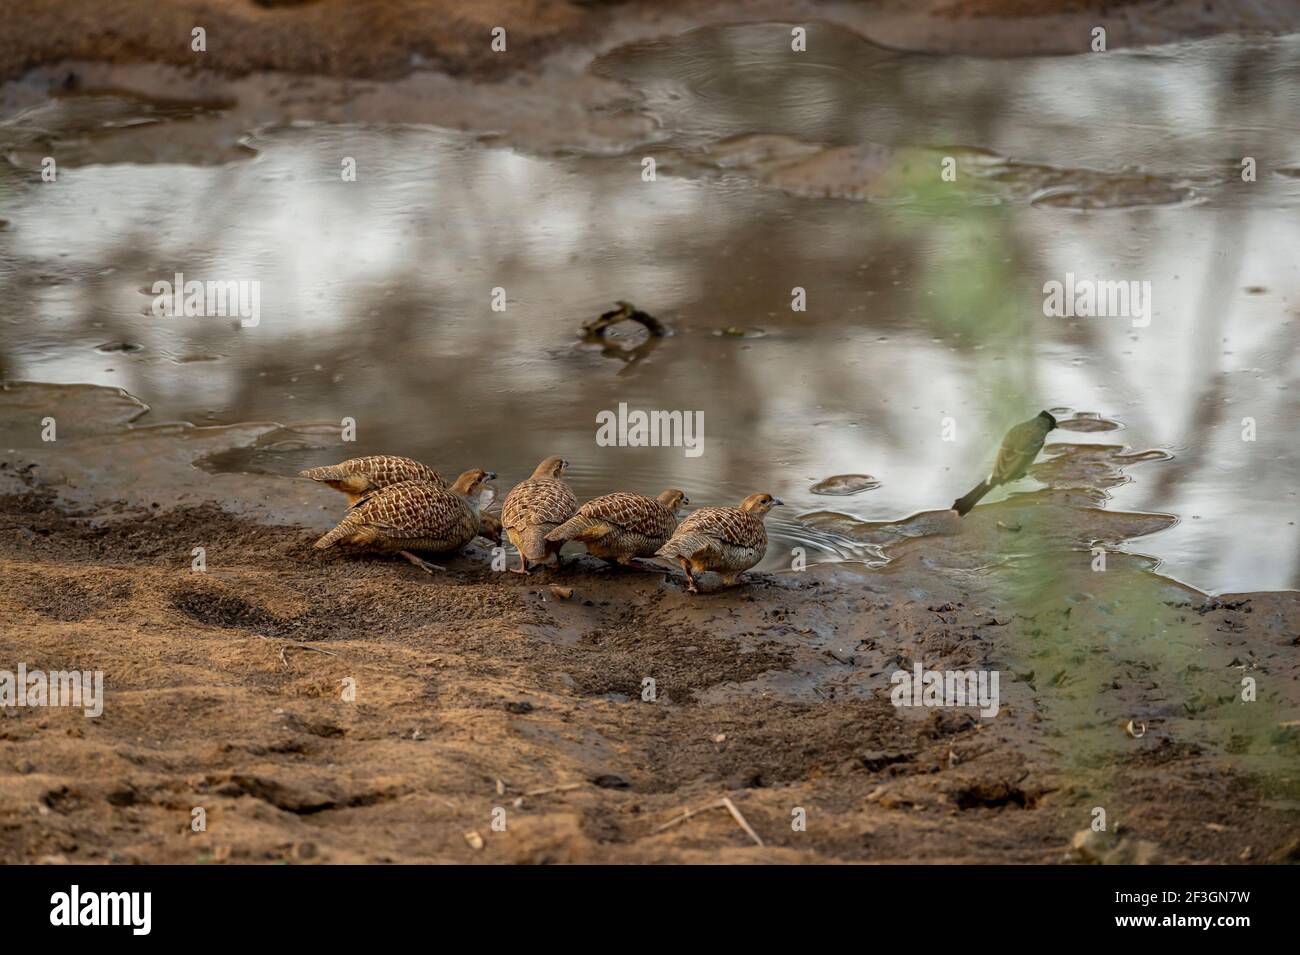 grey francolin or grey partridge or Francolinus pondicerianus family or flock of birds together on a waterhole to drink water or quenching thirst Stock Photo